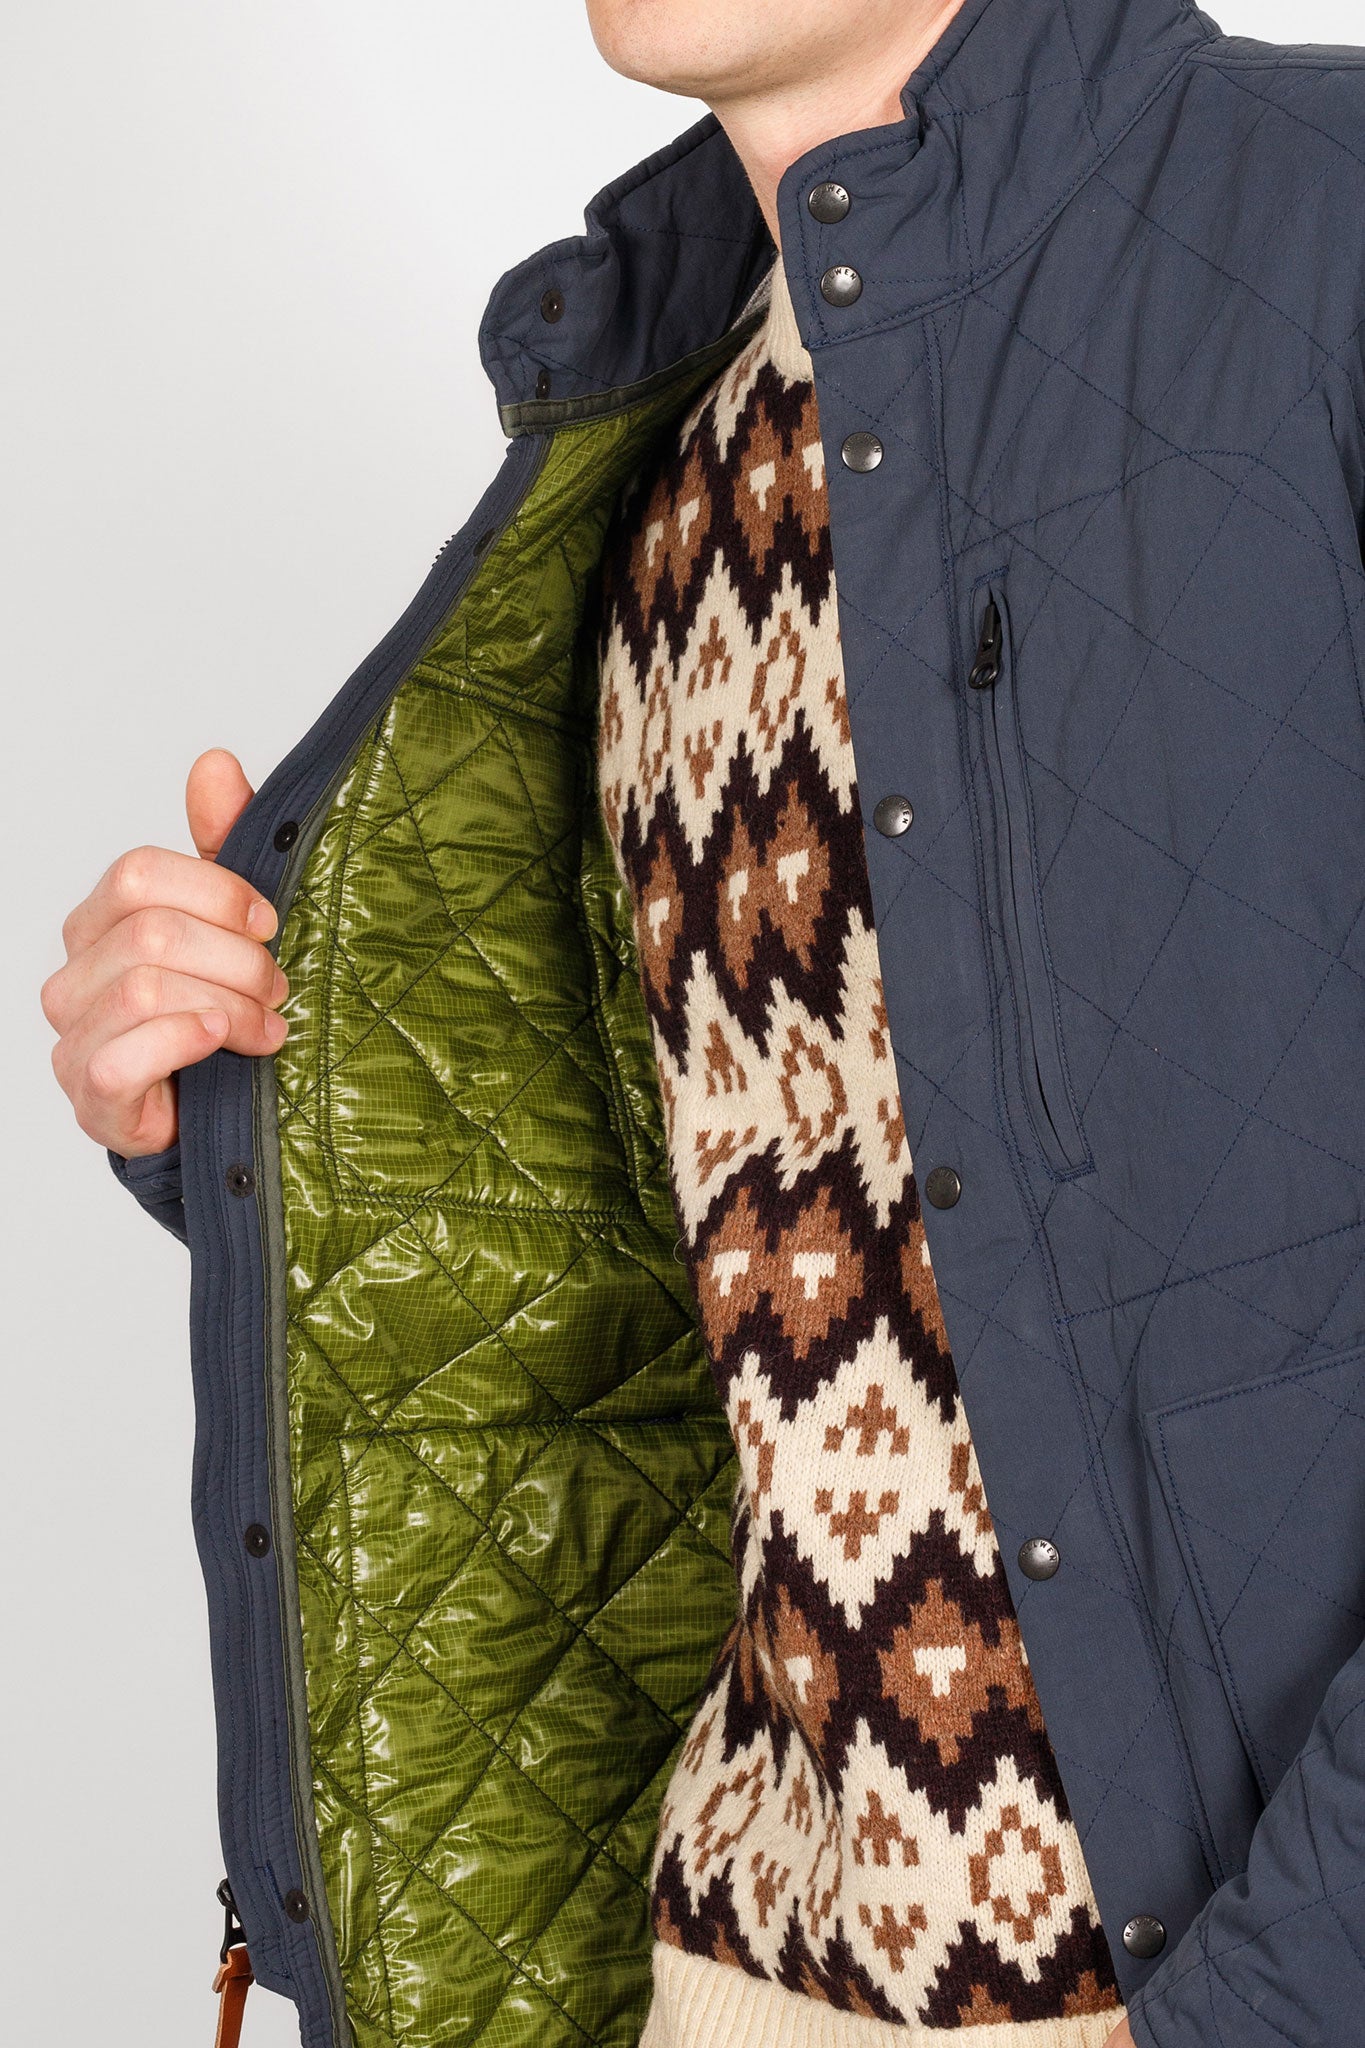 Quilted Tanker Jackets Relwen   